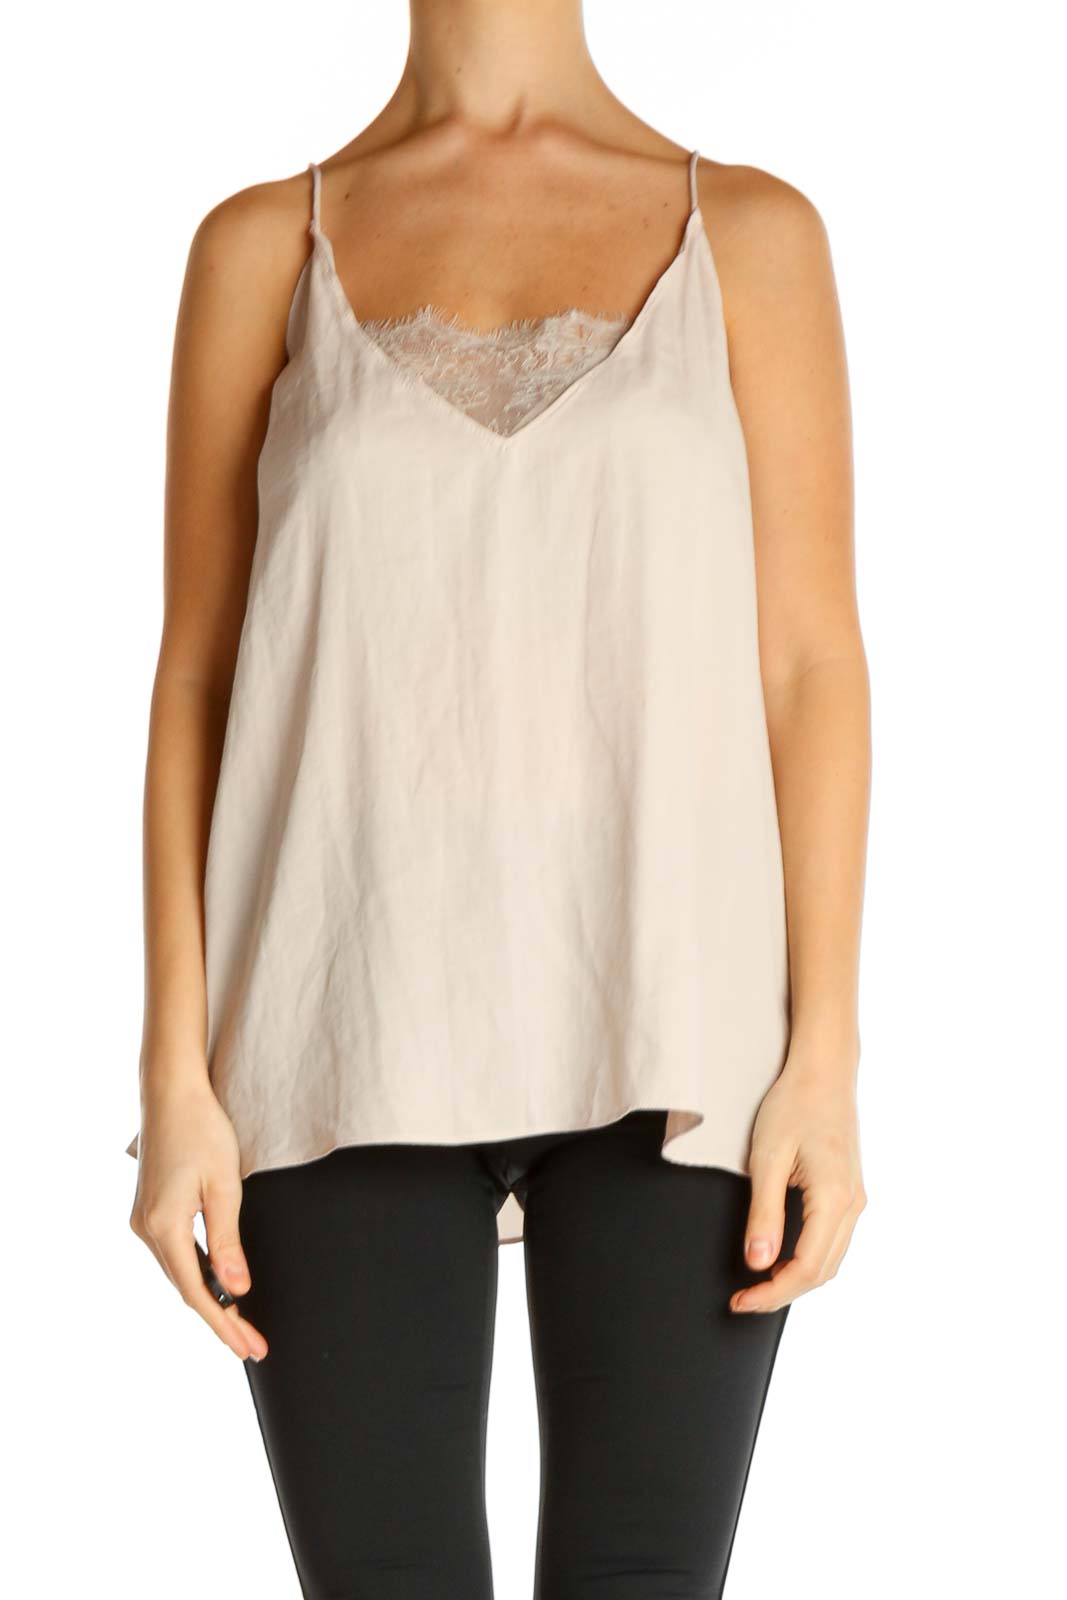 Beige Solid Chic Top Front